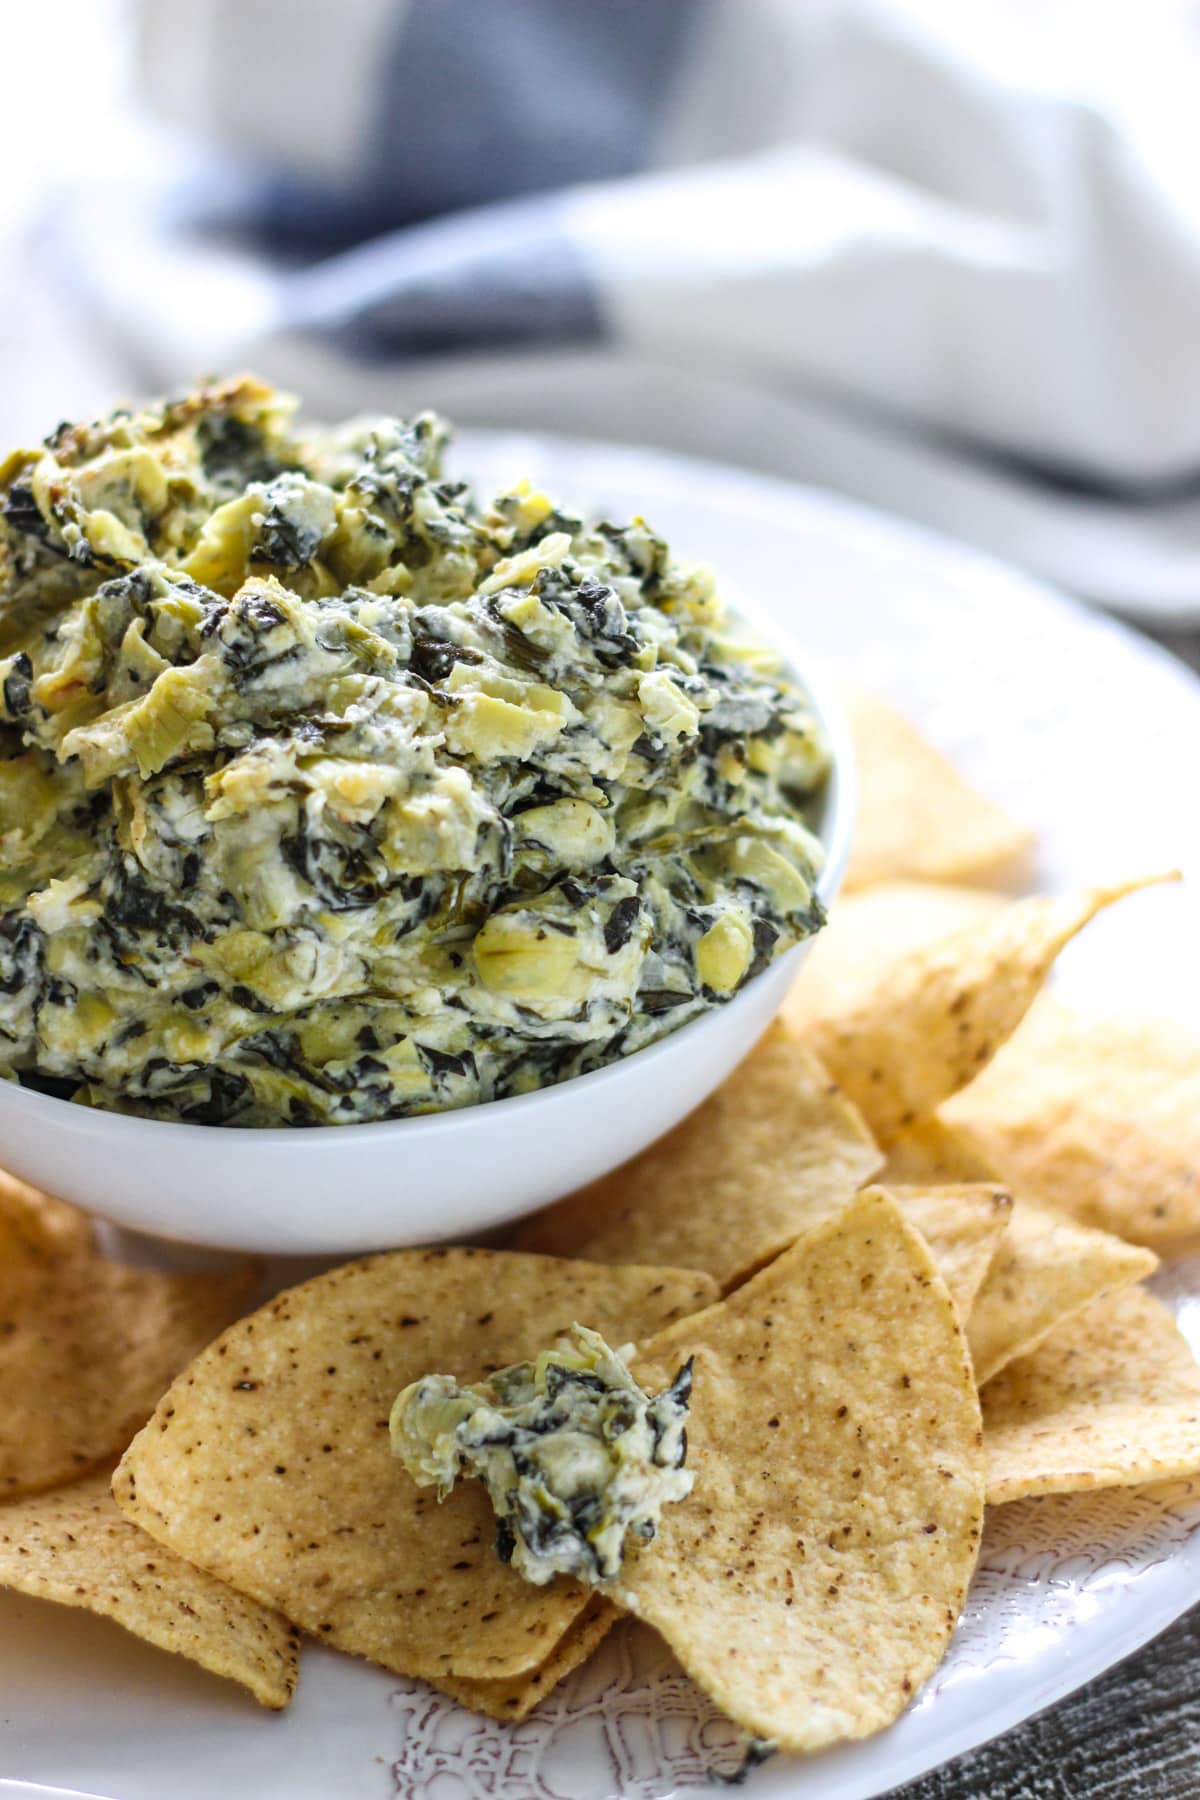 Seriously easy and seriously yummy. This homemade slow cooker spinach and artichoke dip feeds a crowd of ten!